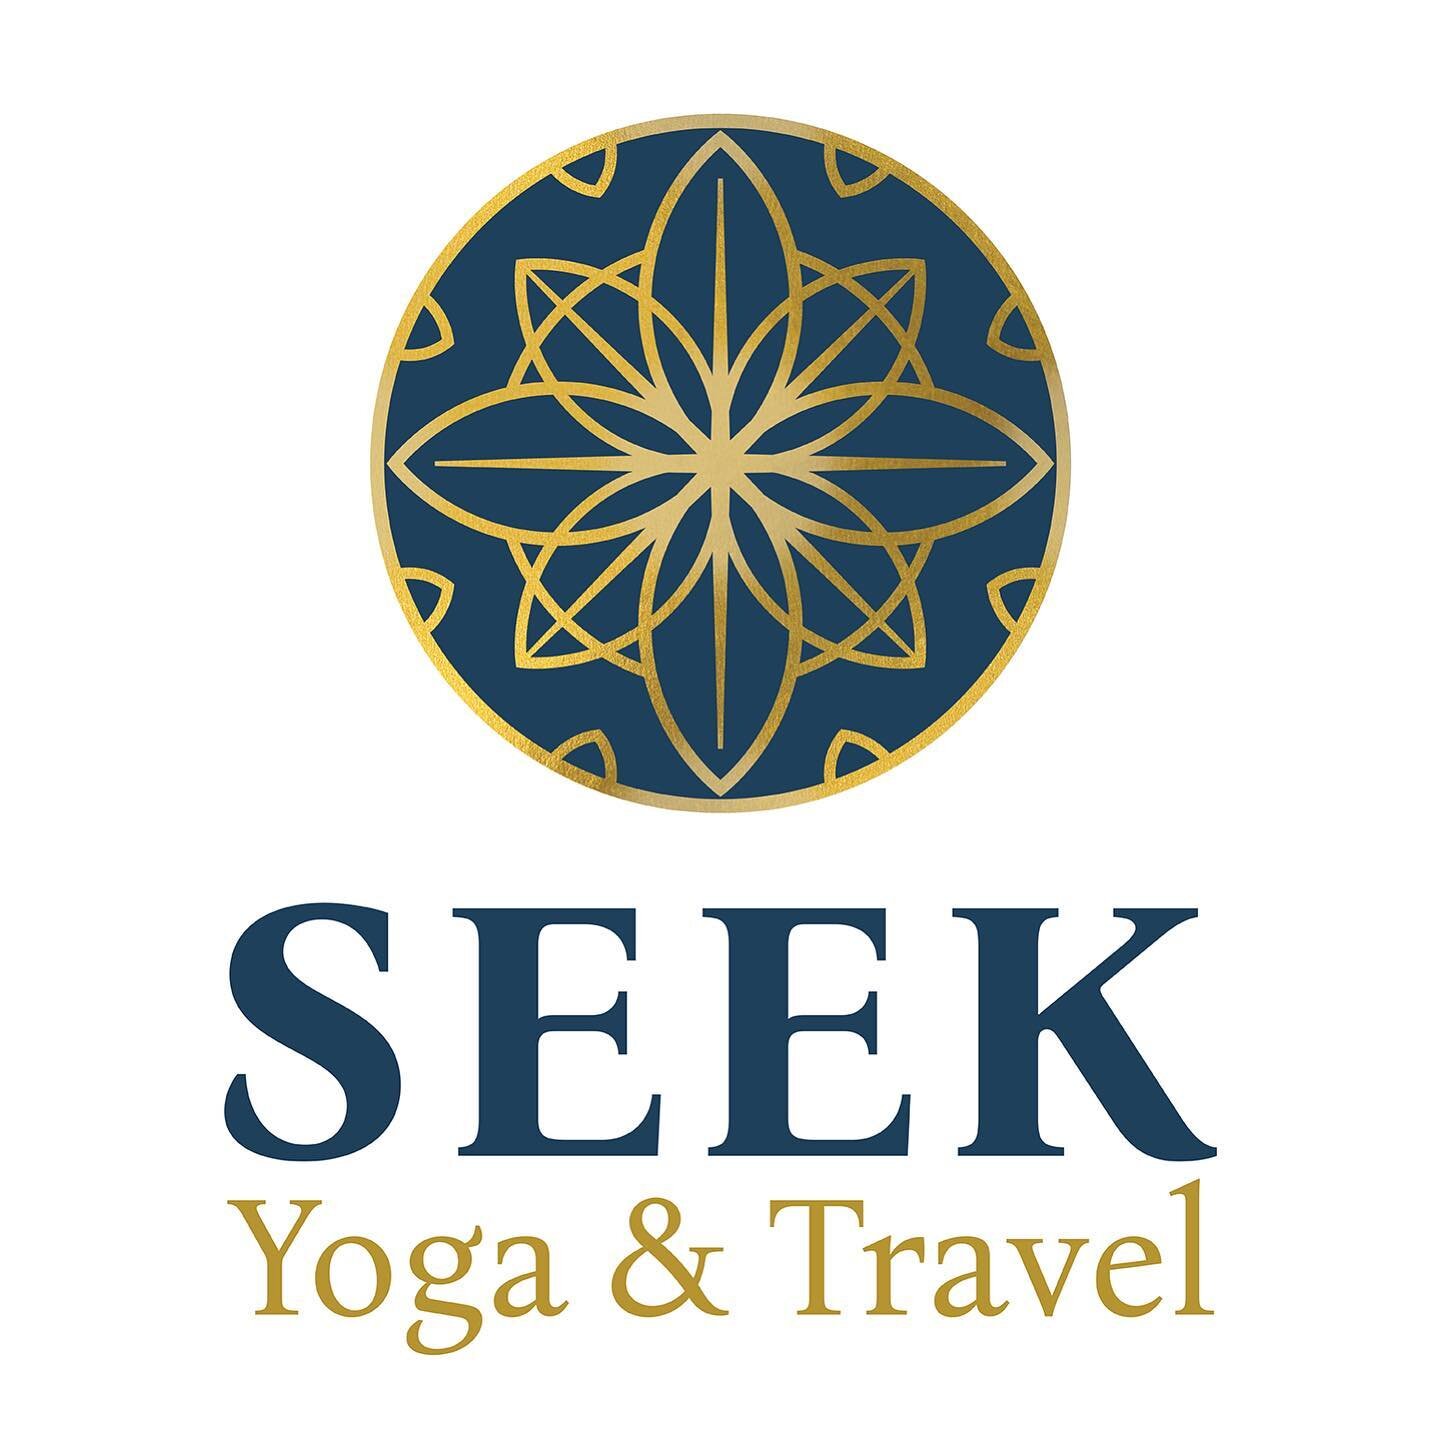 I designed this logo for @seek_yogaandtravel - An elegant and adventurous take on a compass/mandala! Check out their website, too, as that was another recent project!

I can&rsquo;t believe I haven&rsquo;t posted here since September! It&rsquo;s been